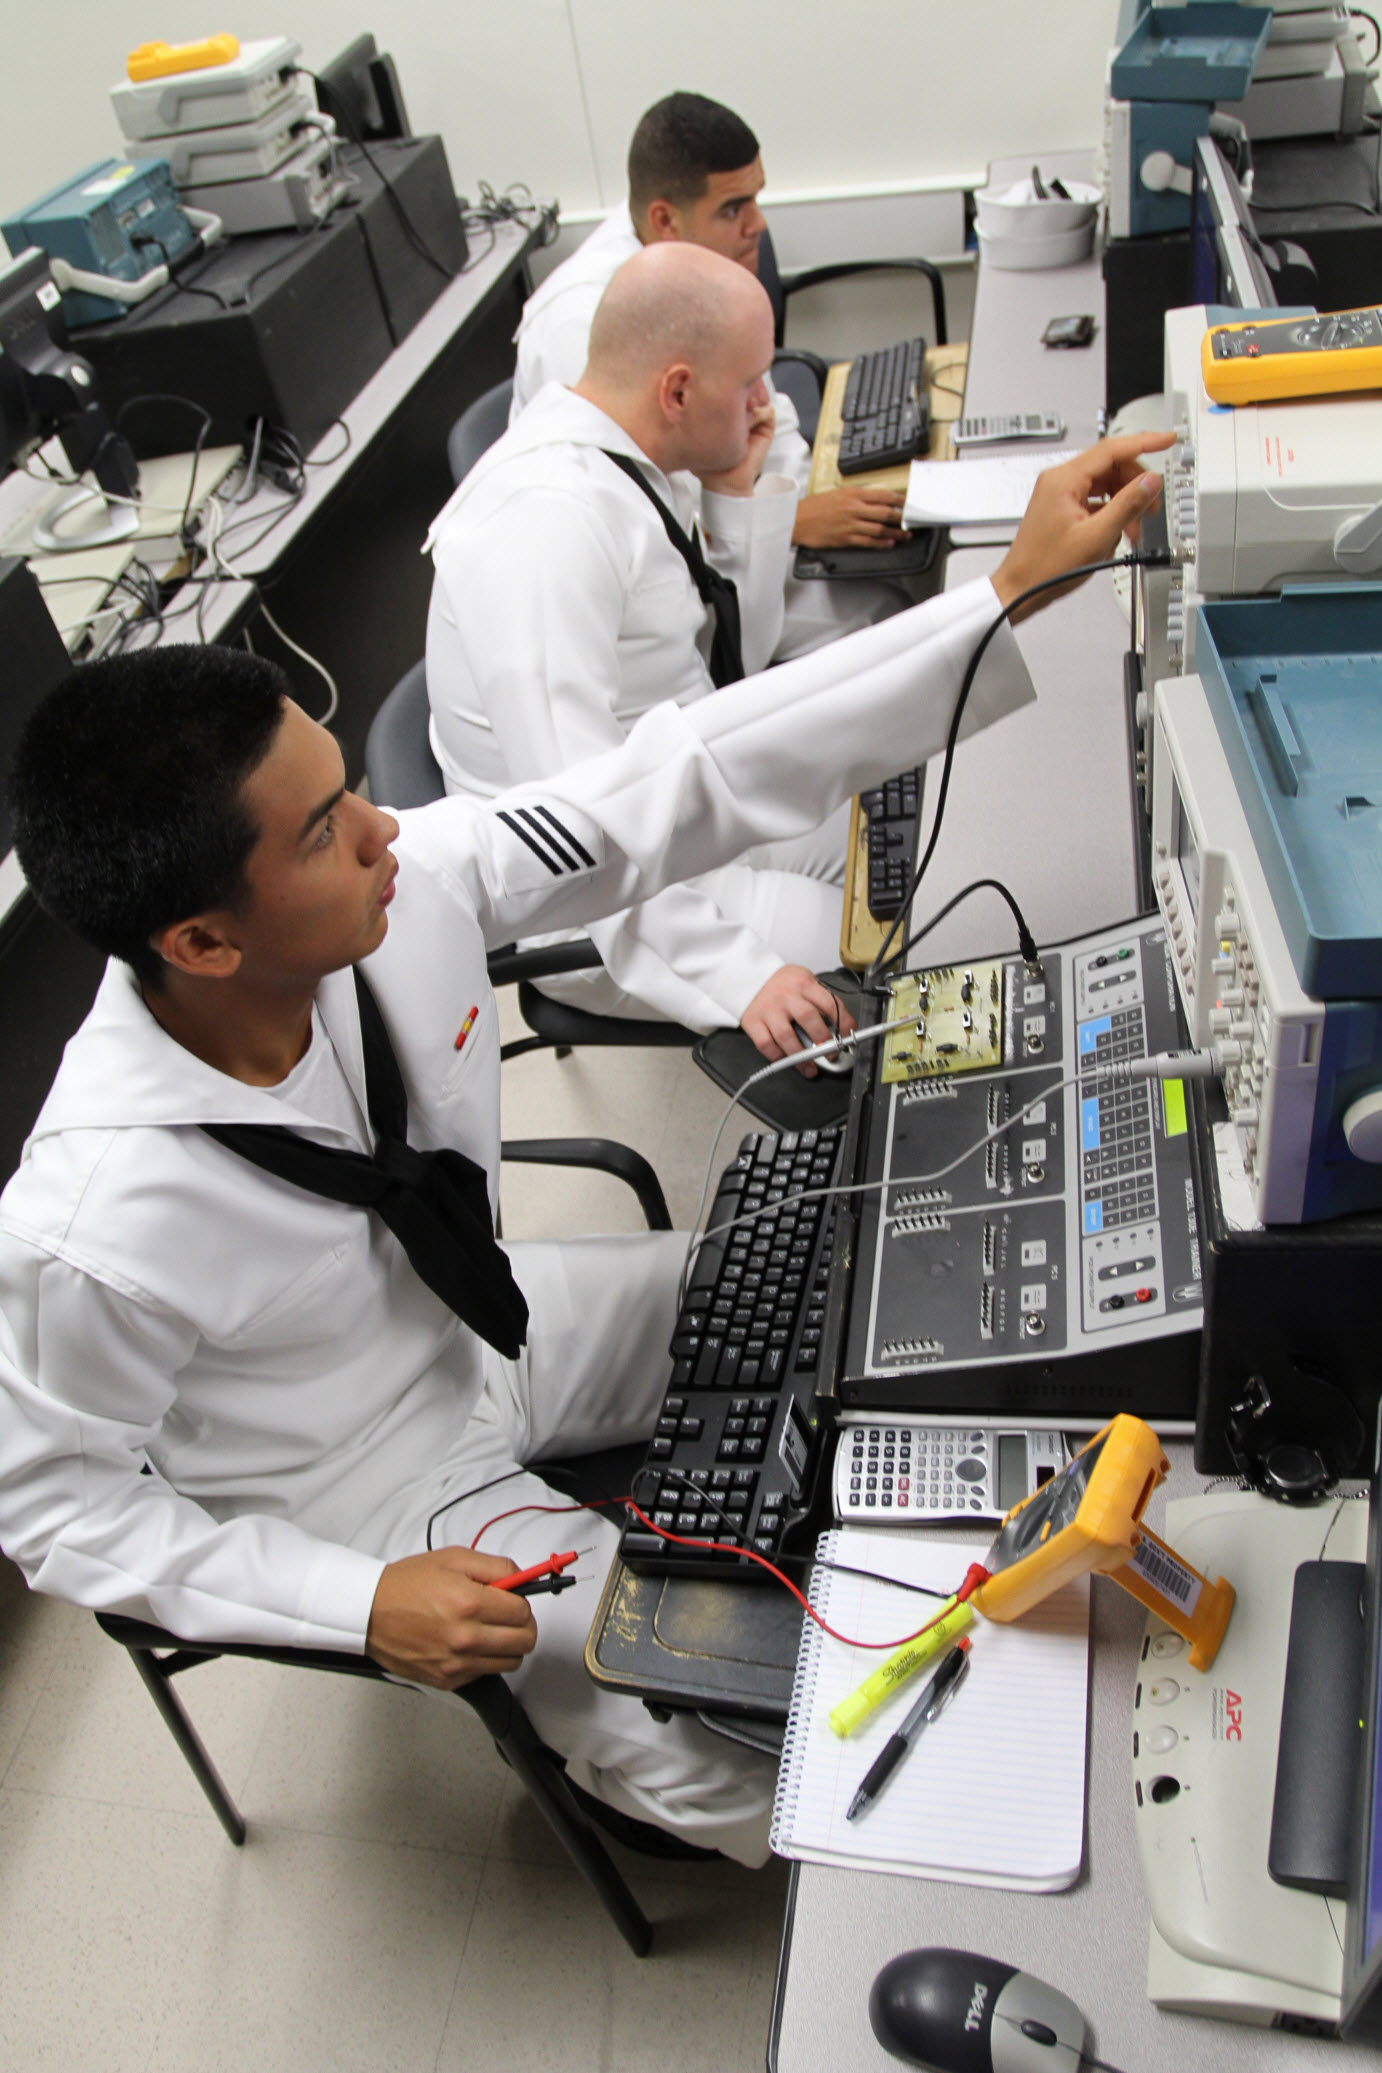 PENSACOLA, Fla. (Oct. 18, 2012) Seaman Jesus Torres adjusts test equipment during a lab session in the Cryptology Technician (Maintenance) course at Naval Air Technical Training Center at Naval Air Station Pensacola. The U.S. Navy is reliable, flexible, and ready to respond worldwide on, above, and below the sea. Join the conversation on social media using #warfighting. U.S. Navy photo by Joy Samsel.